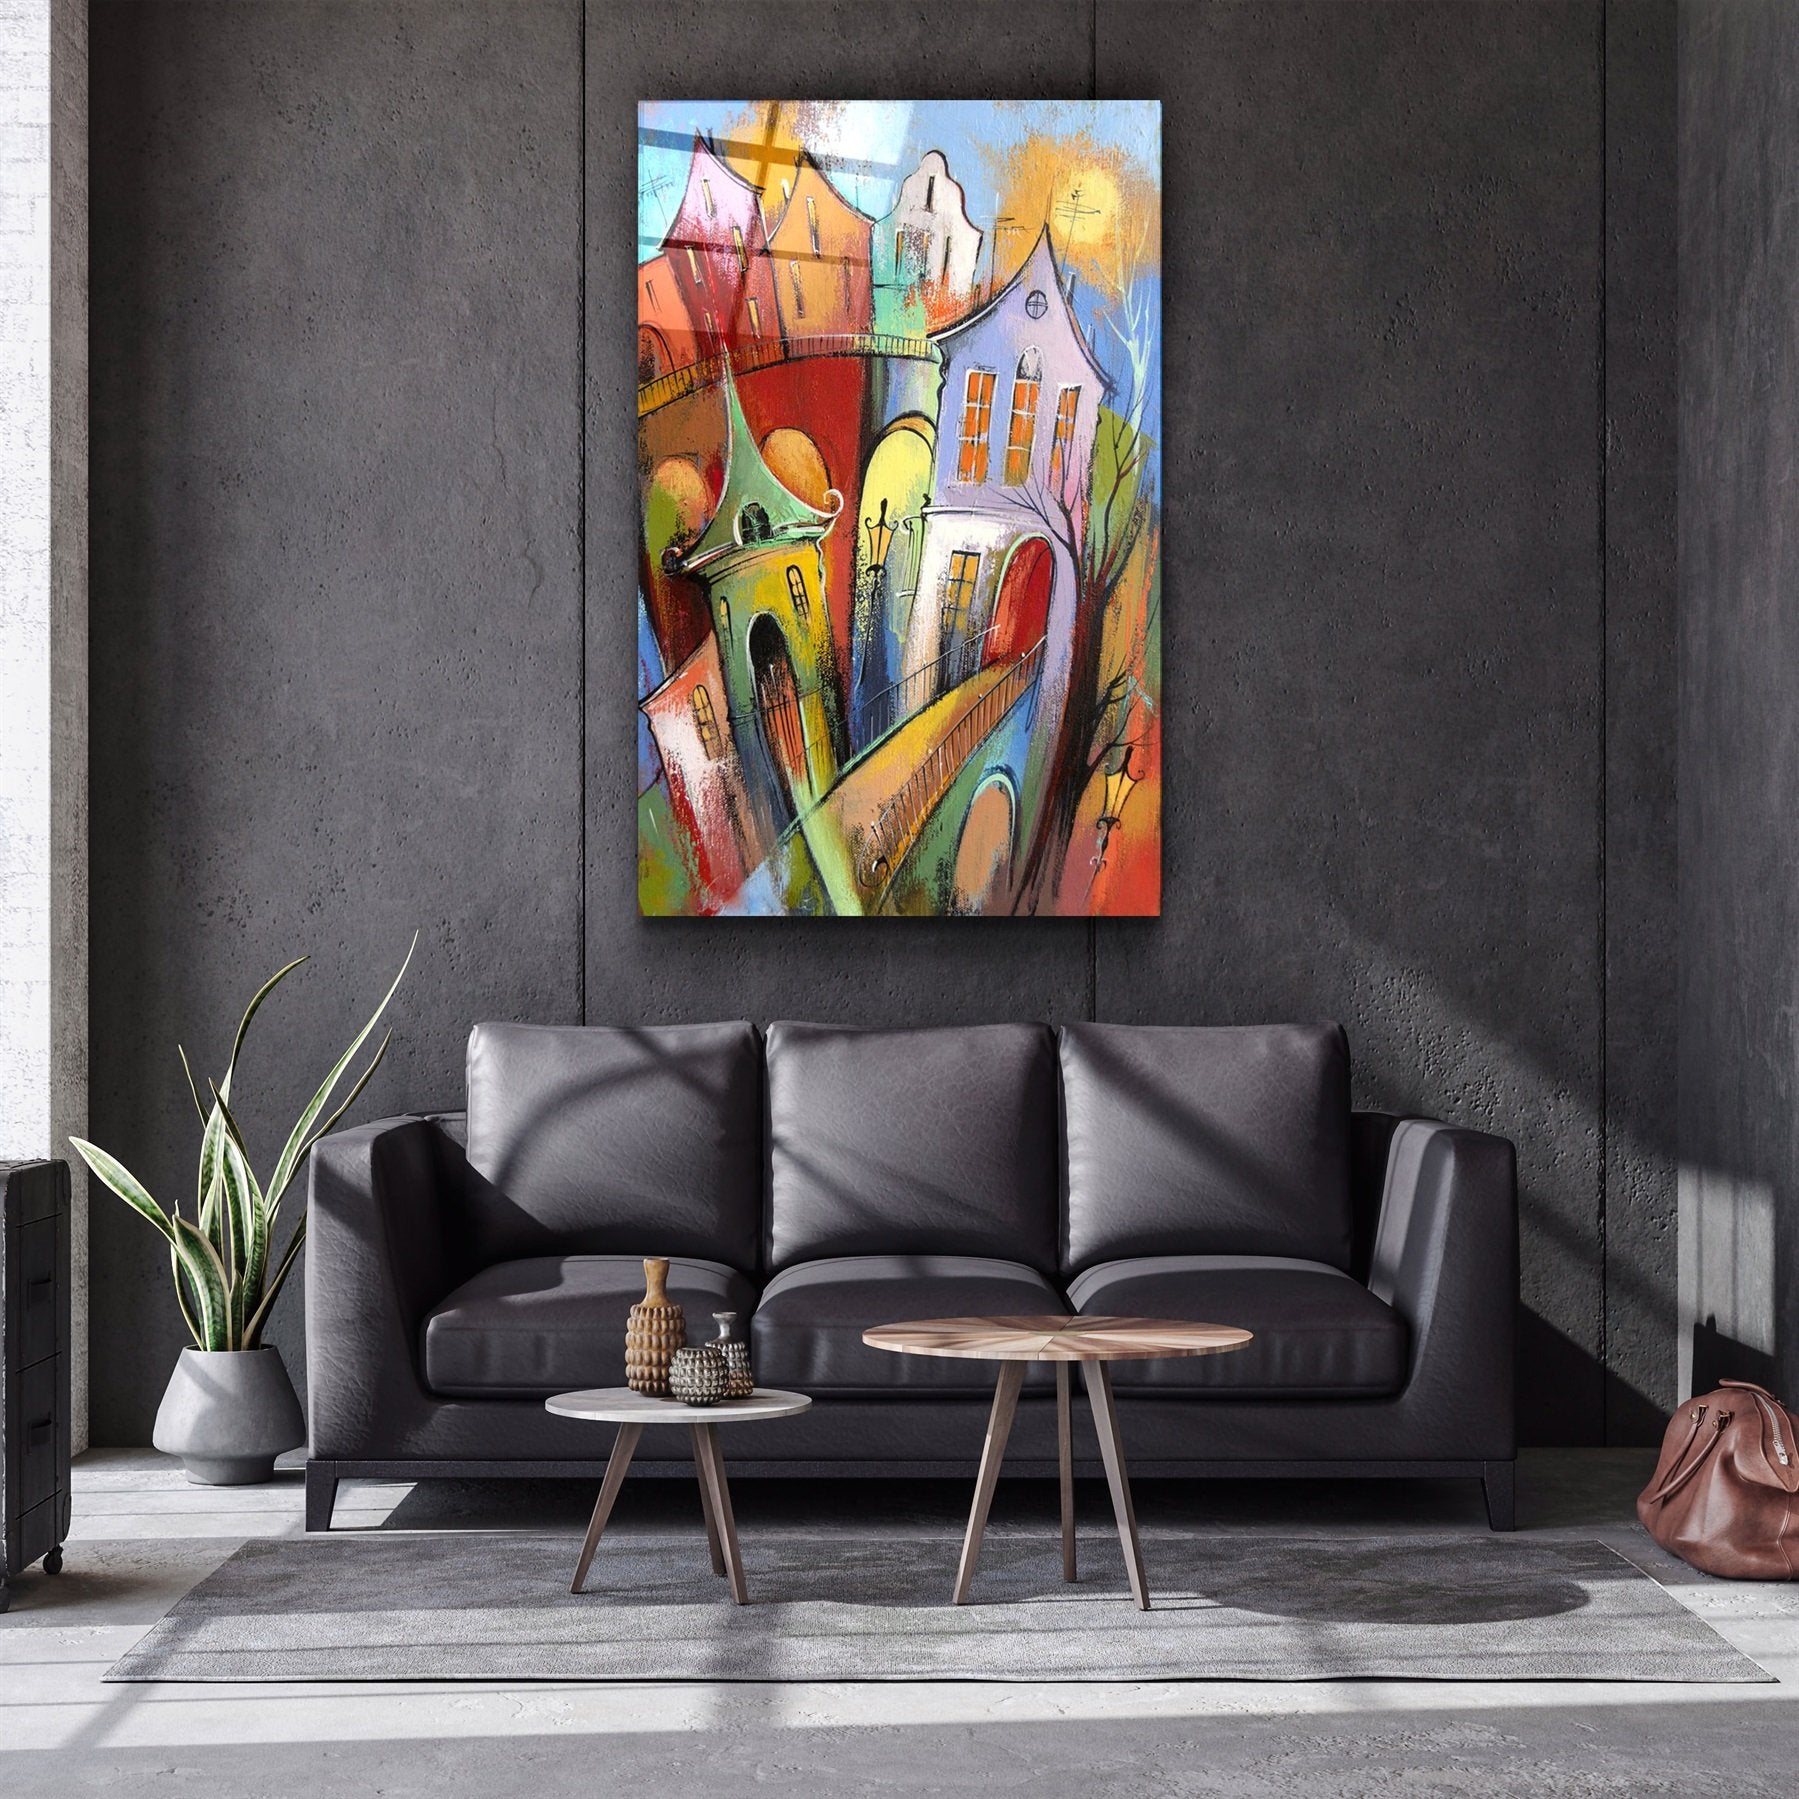 ・"Oil Painting Dream Town"・Glass Wall Art